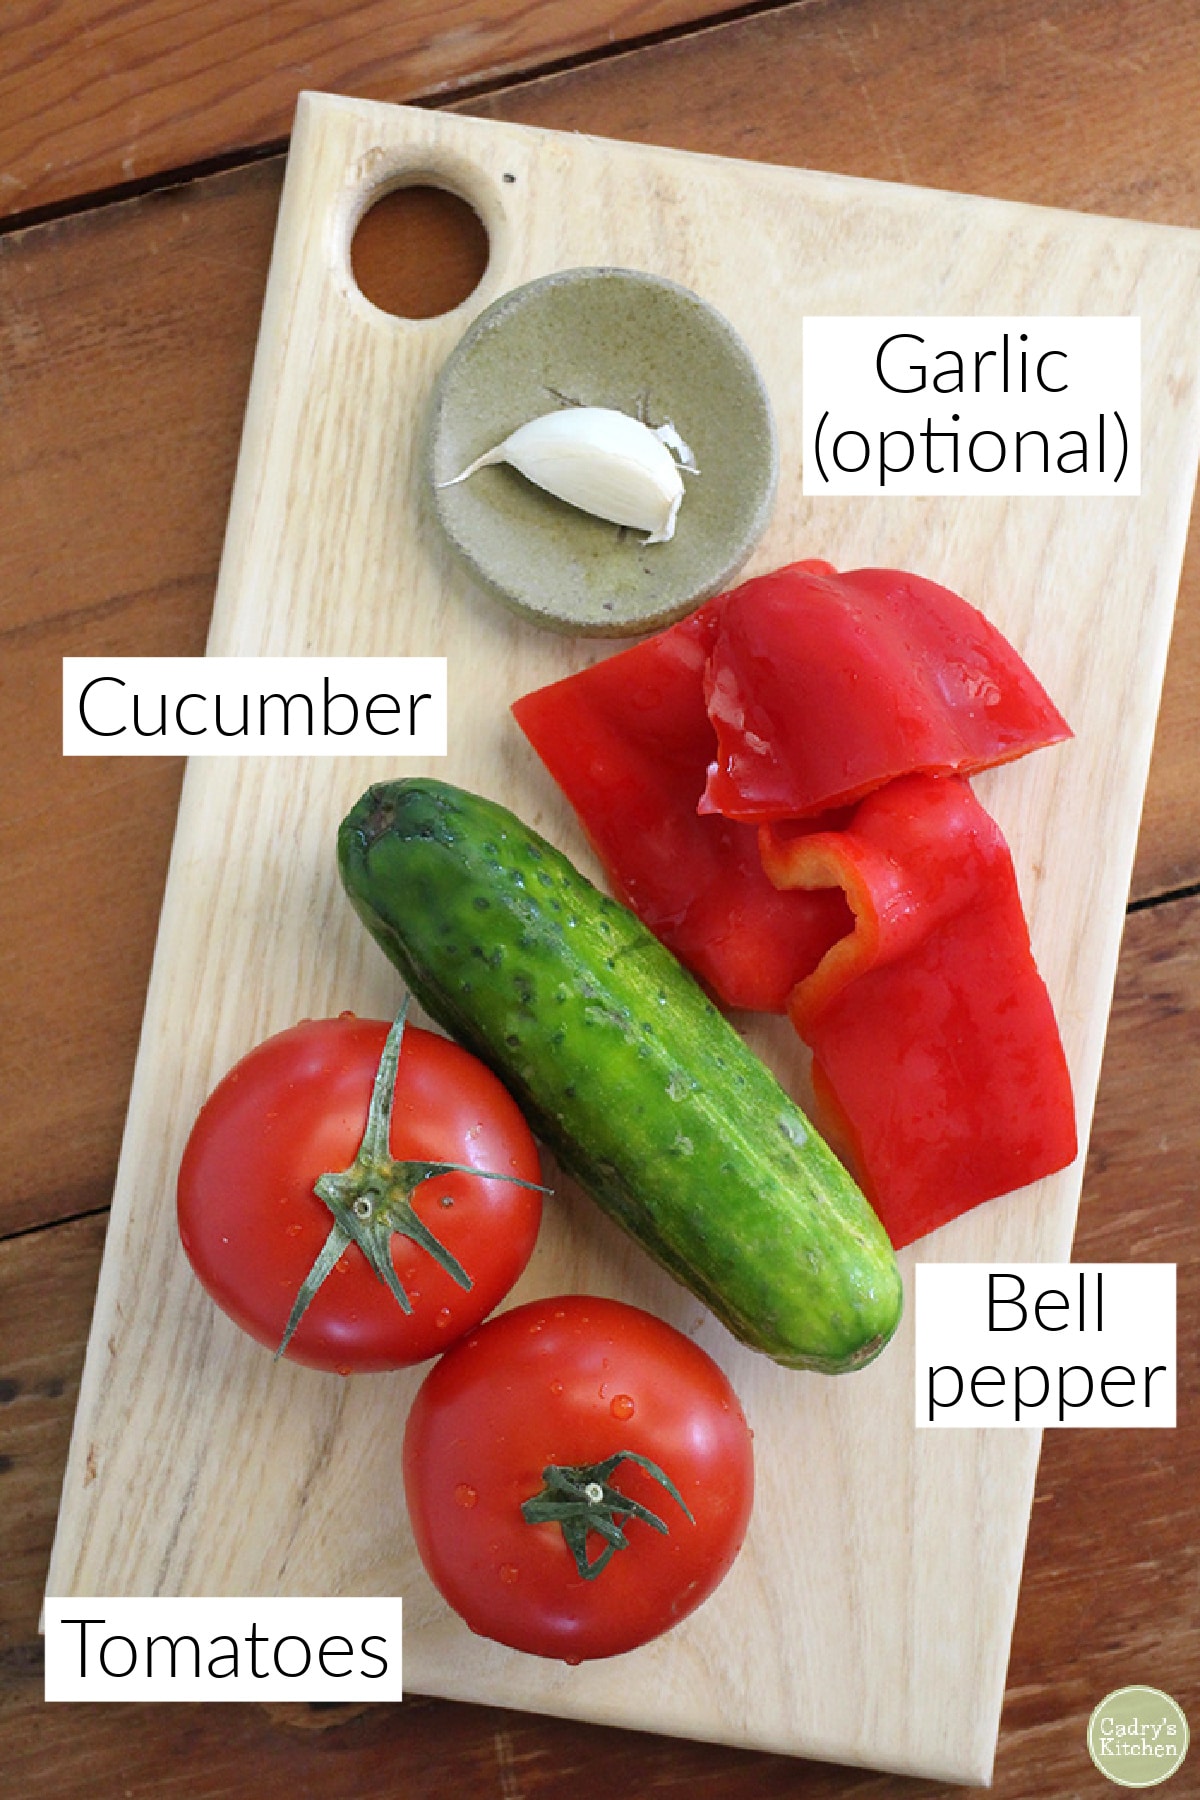 Labeled ingredients for tomato juice blend.